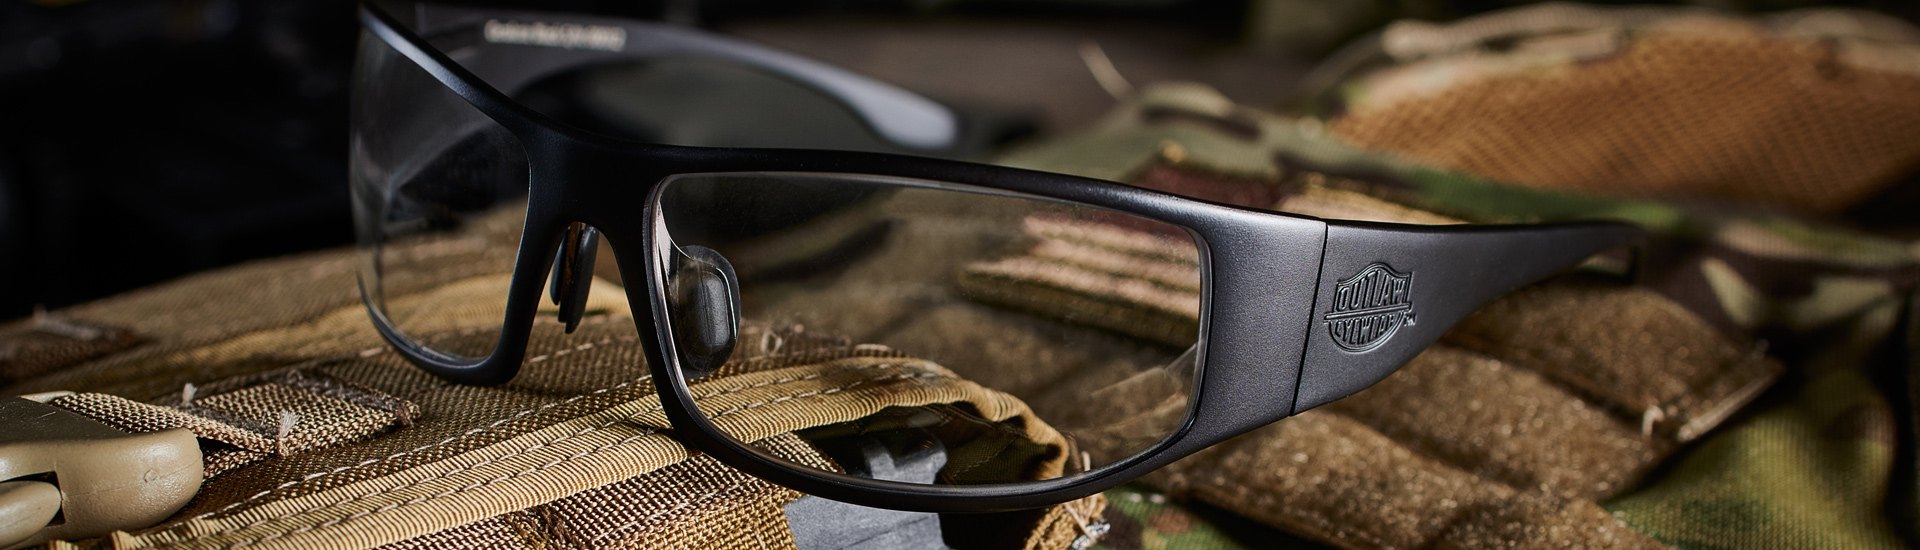 Men's MILITARY TACTICAL Wrap Around Safety Camouflage SUNGLASSES Anti Glare  Lens 